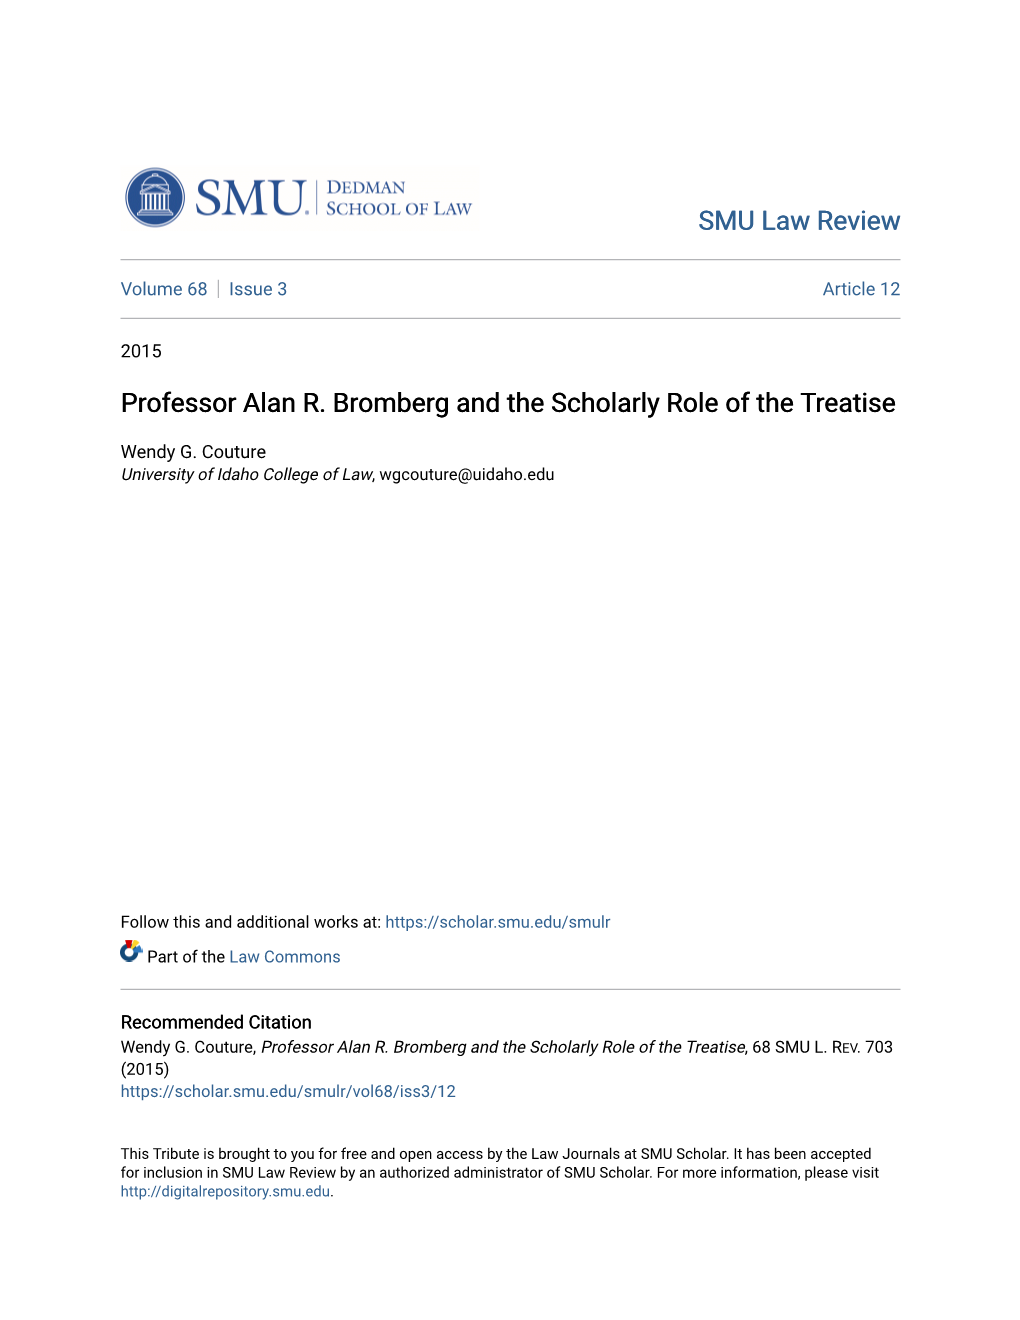 Professor Alan R. Bromberg and the Scholarly Role of the Treatise